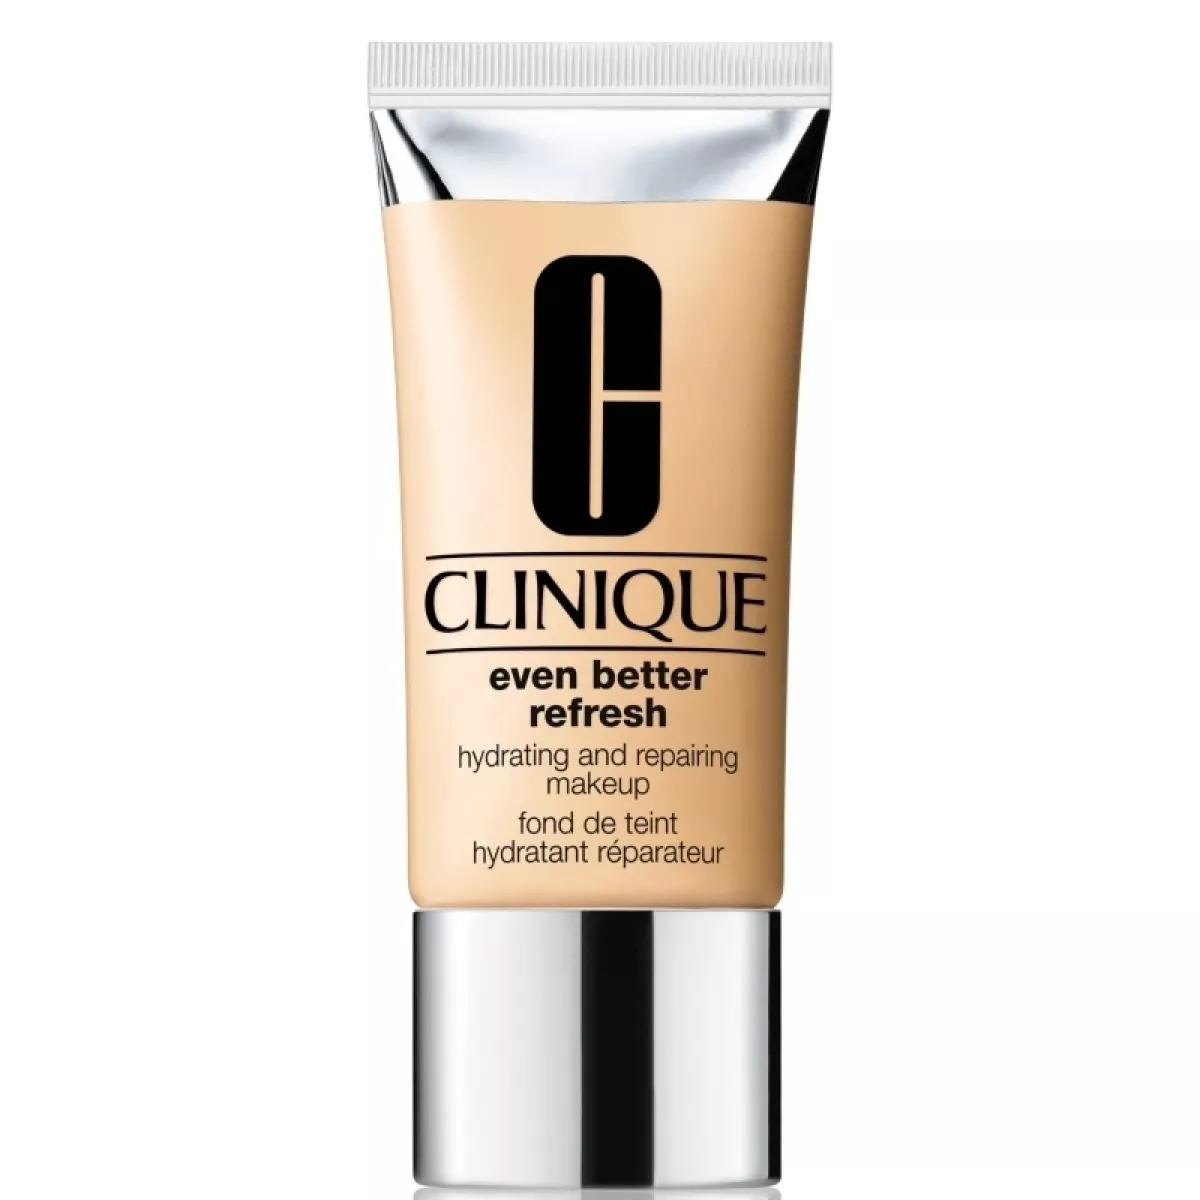 #1 - Clinique Even Better Refresh Hydrating And Repairing Makeup 30 ml - WN 12 Meringue (U)